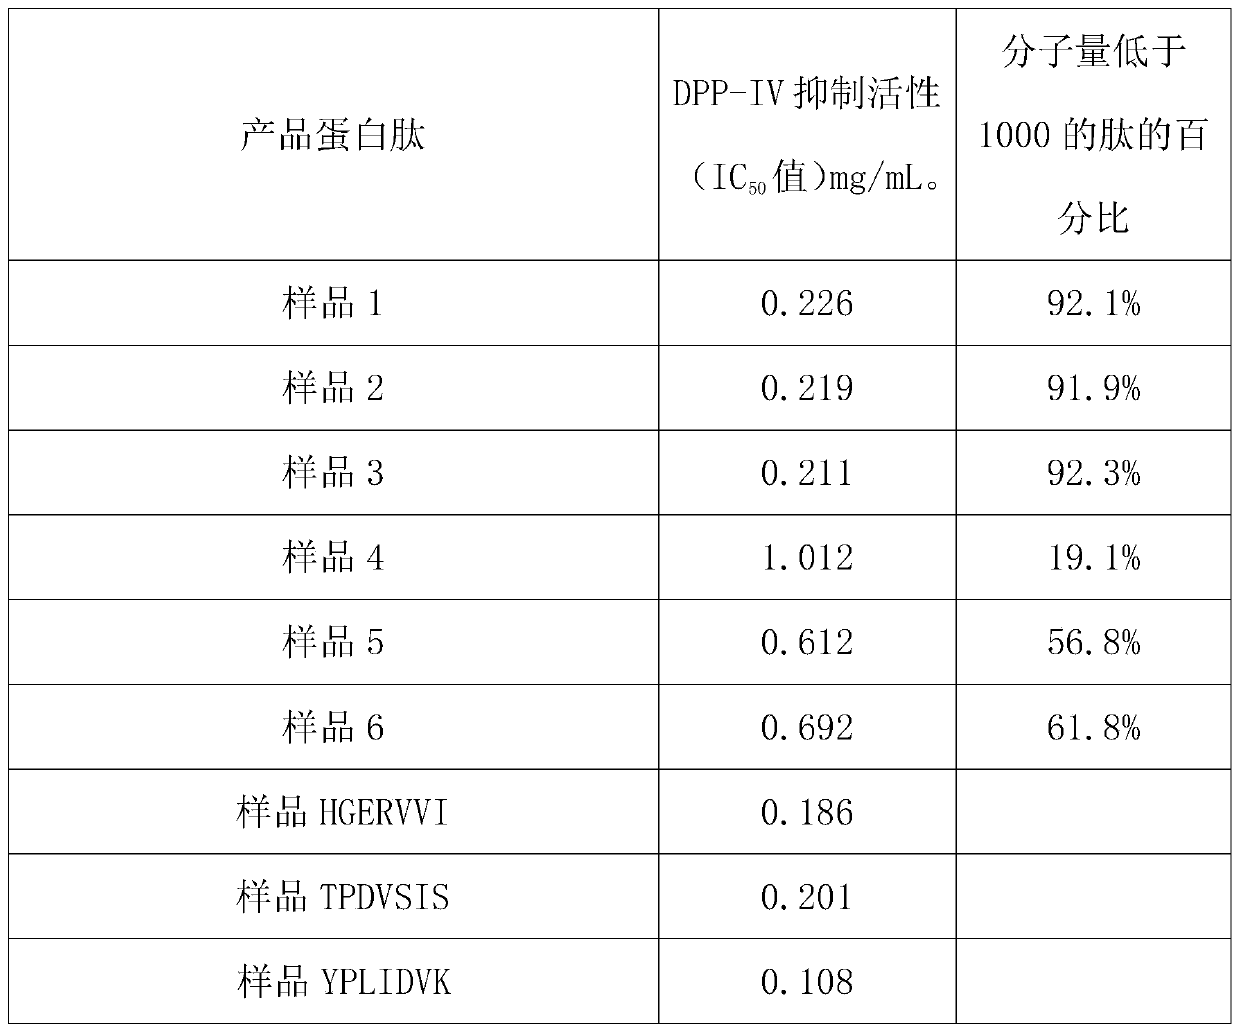 Alga protein peptide with DPP-IV inhibition function and preparation method of alga protein peptide